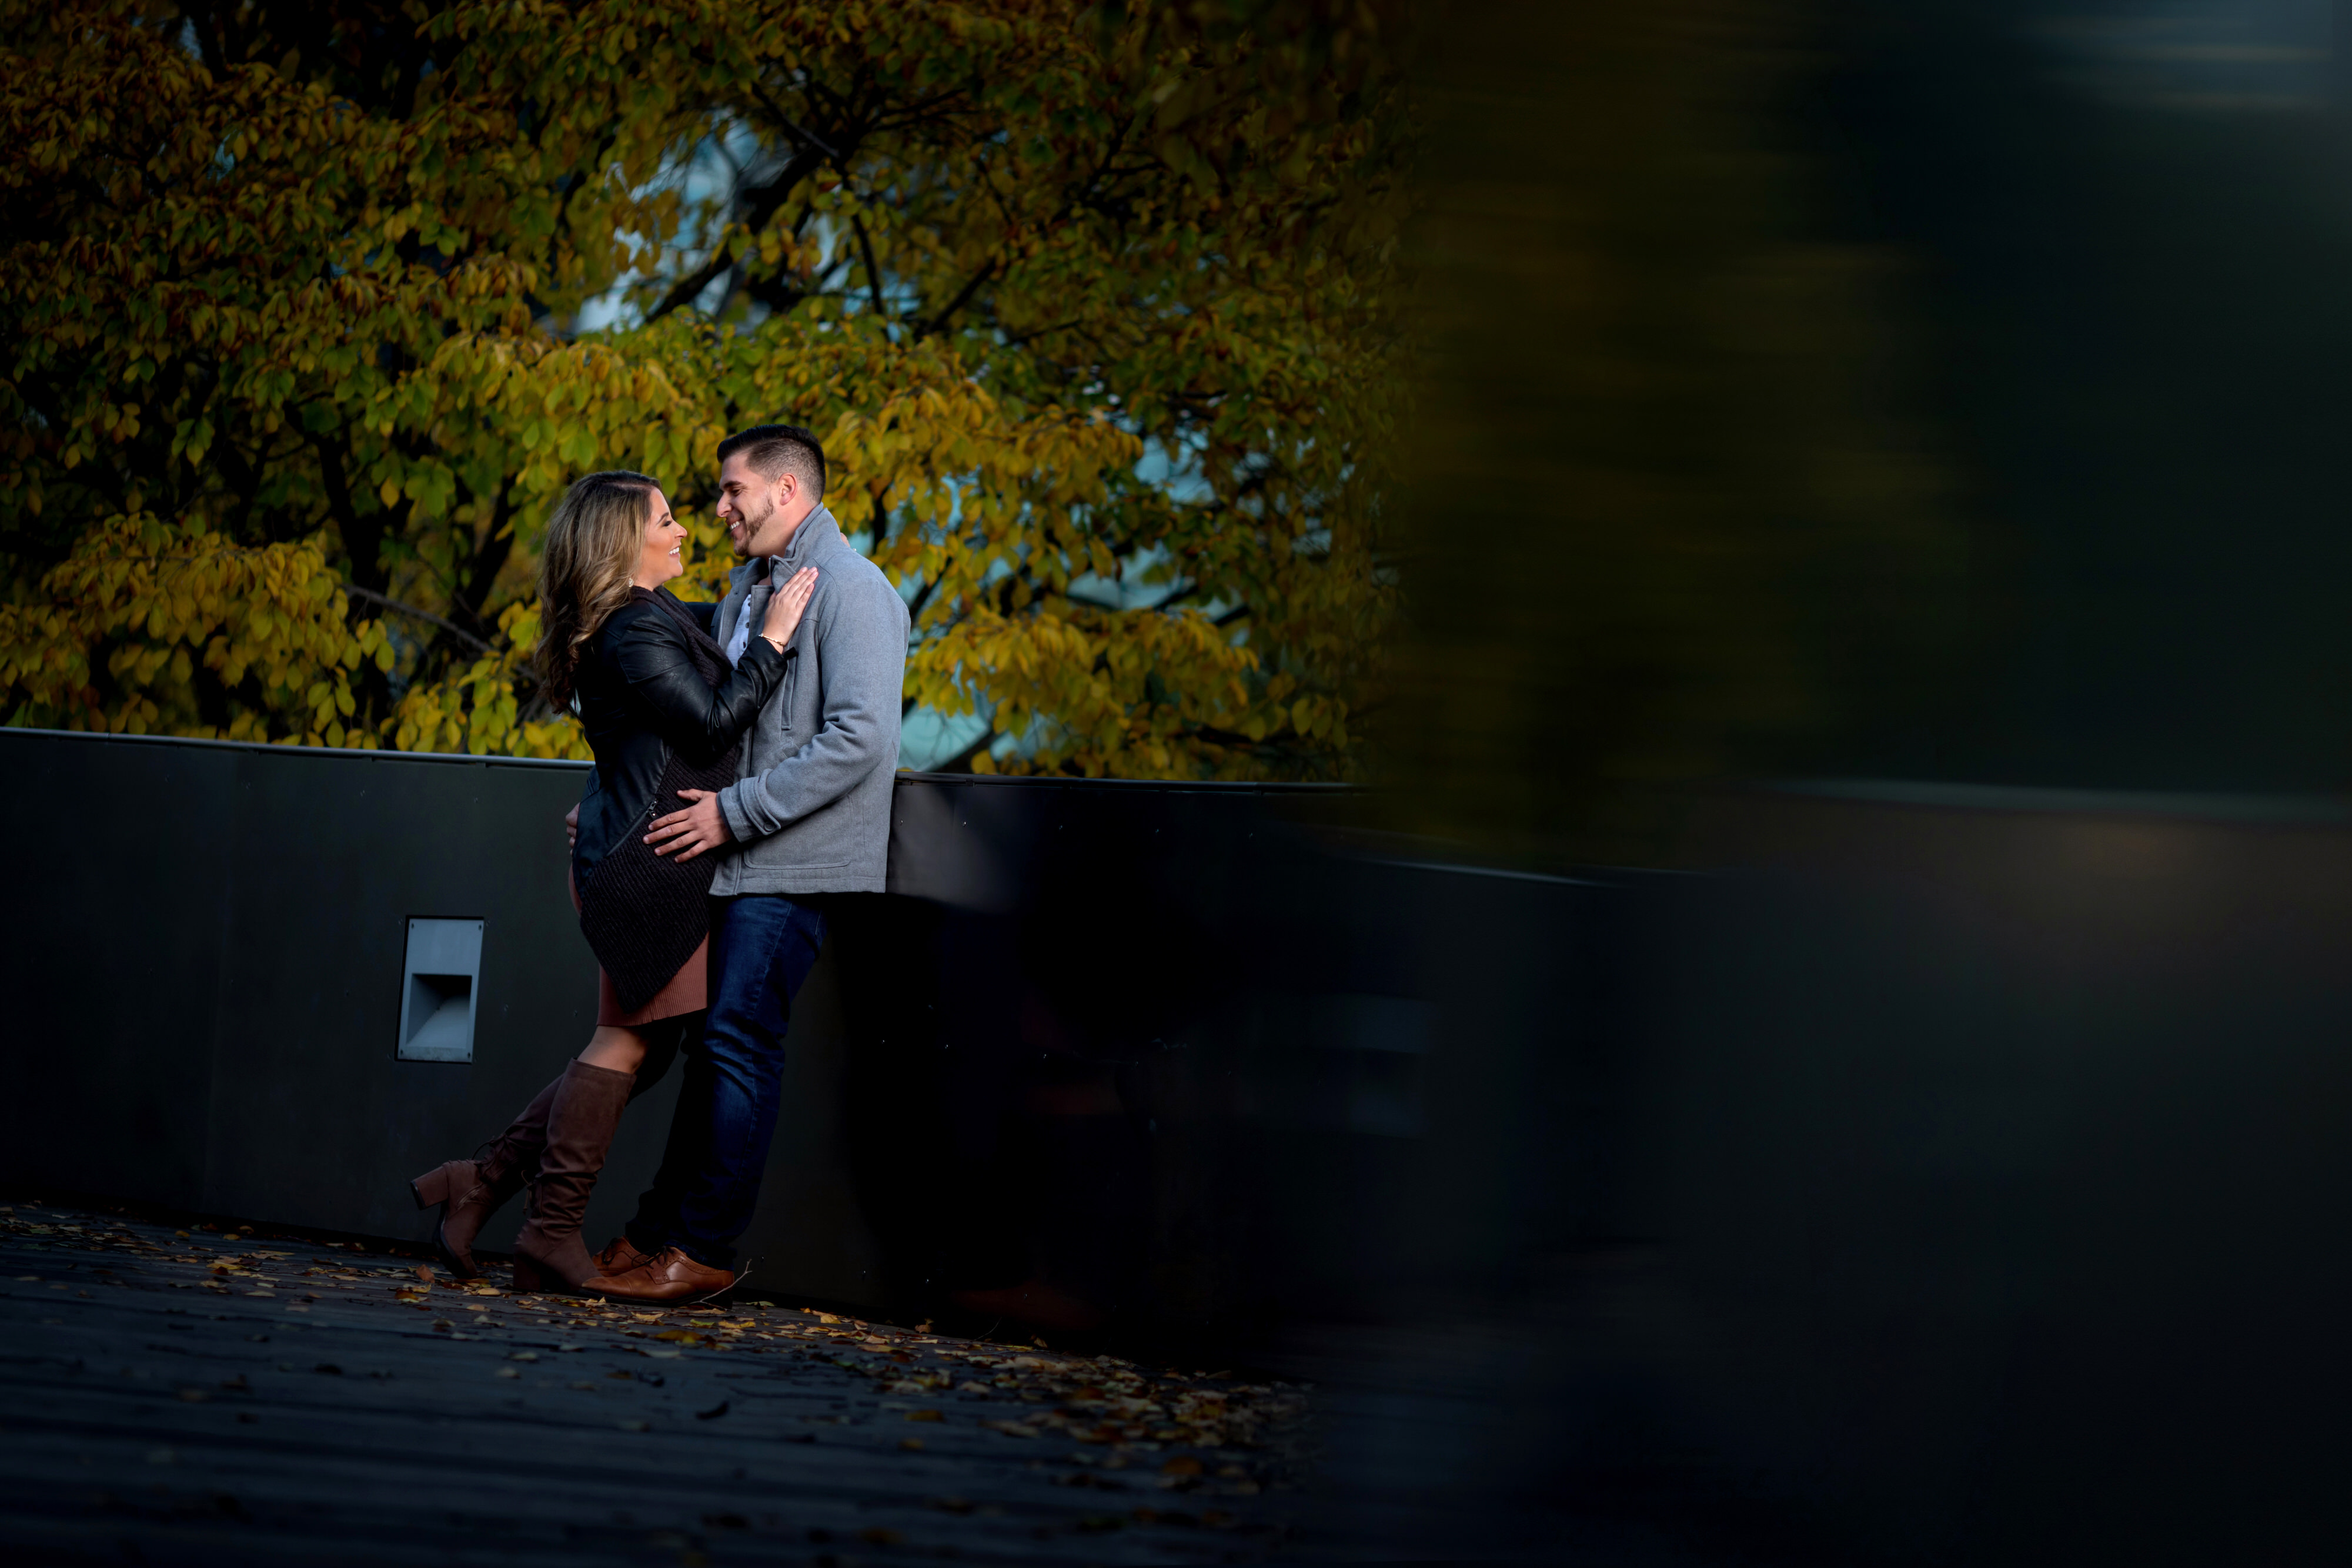 couple poses for engagement photos in Lurie Garden at Millennium Park in downtown Chicago